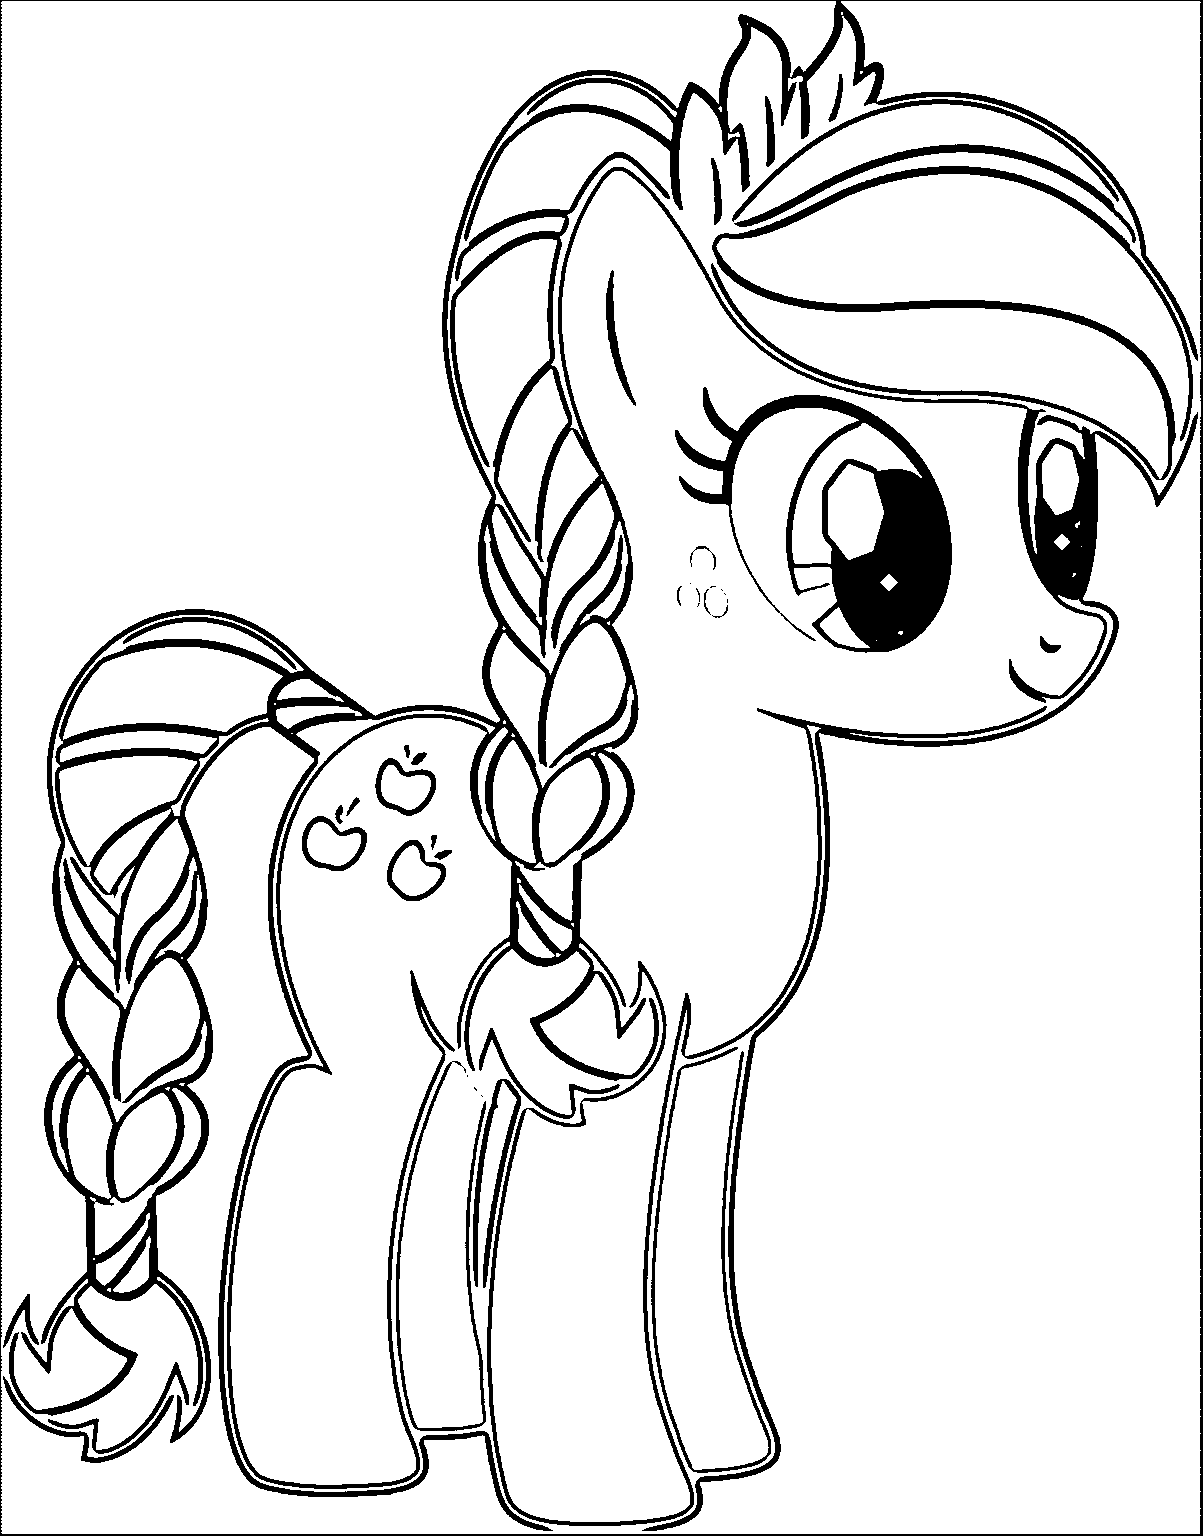 My Little Pony Coloring Pages | szerkebumennewsco